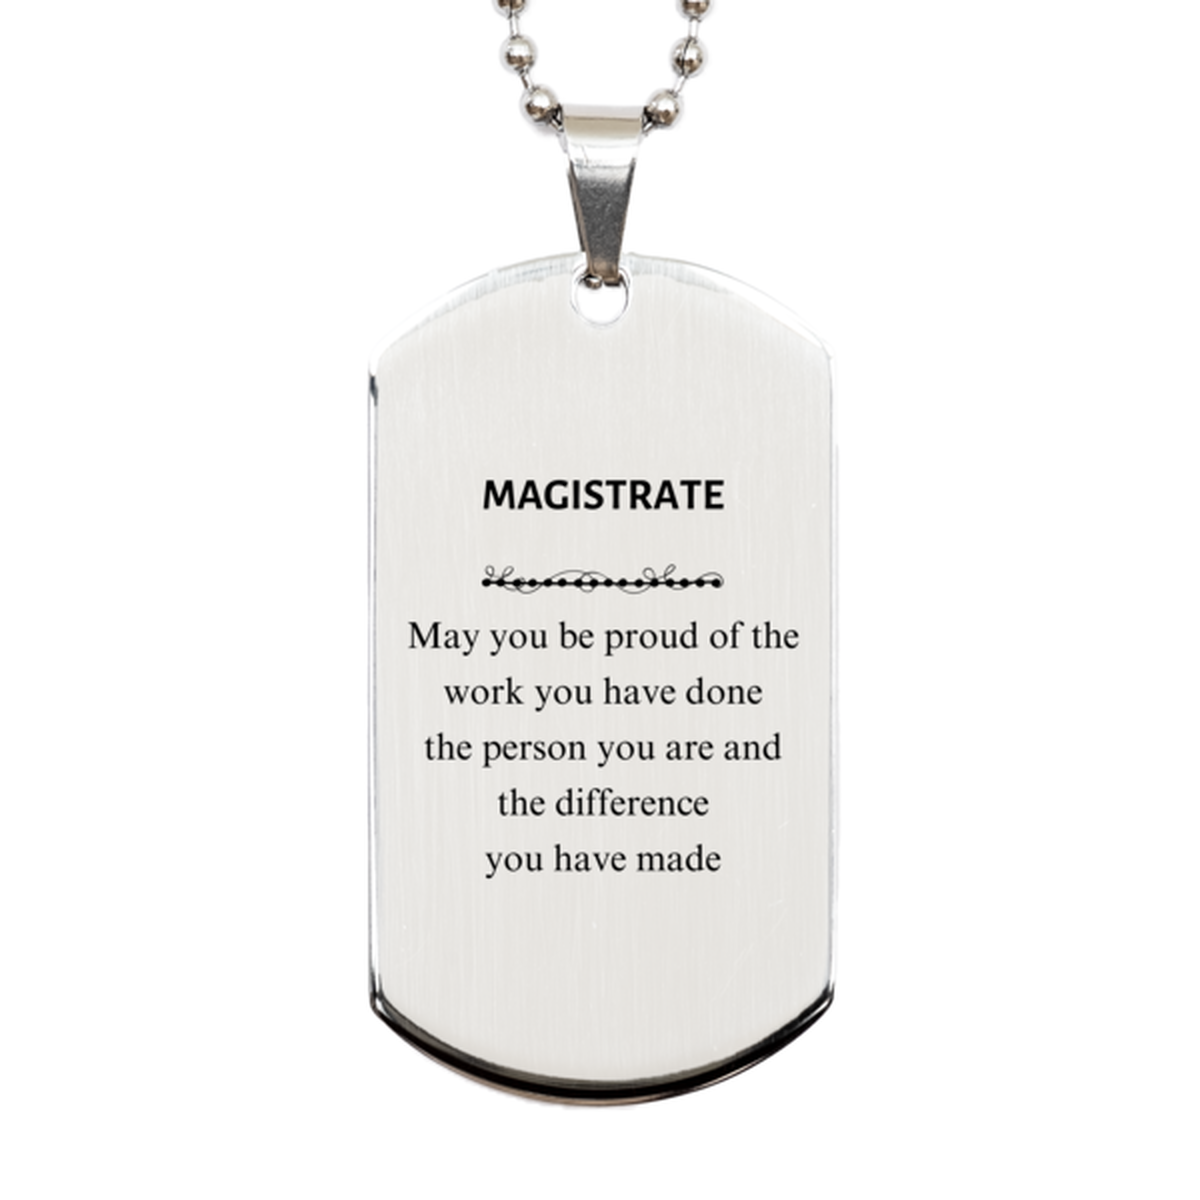 Magistrate May you be proud of the work you have done, Retirement Magistrate Silver Dog Tag for Colleague Appreciation Gifts Amazing for Magistrate